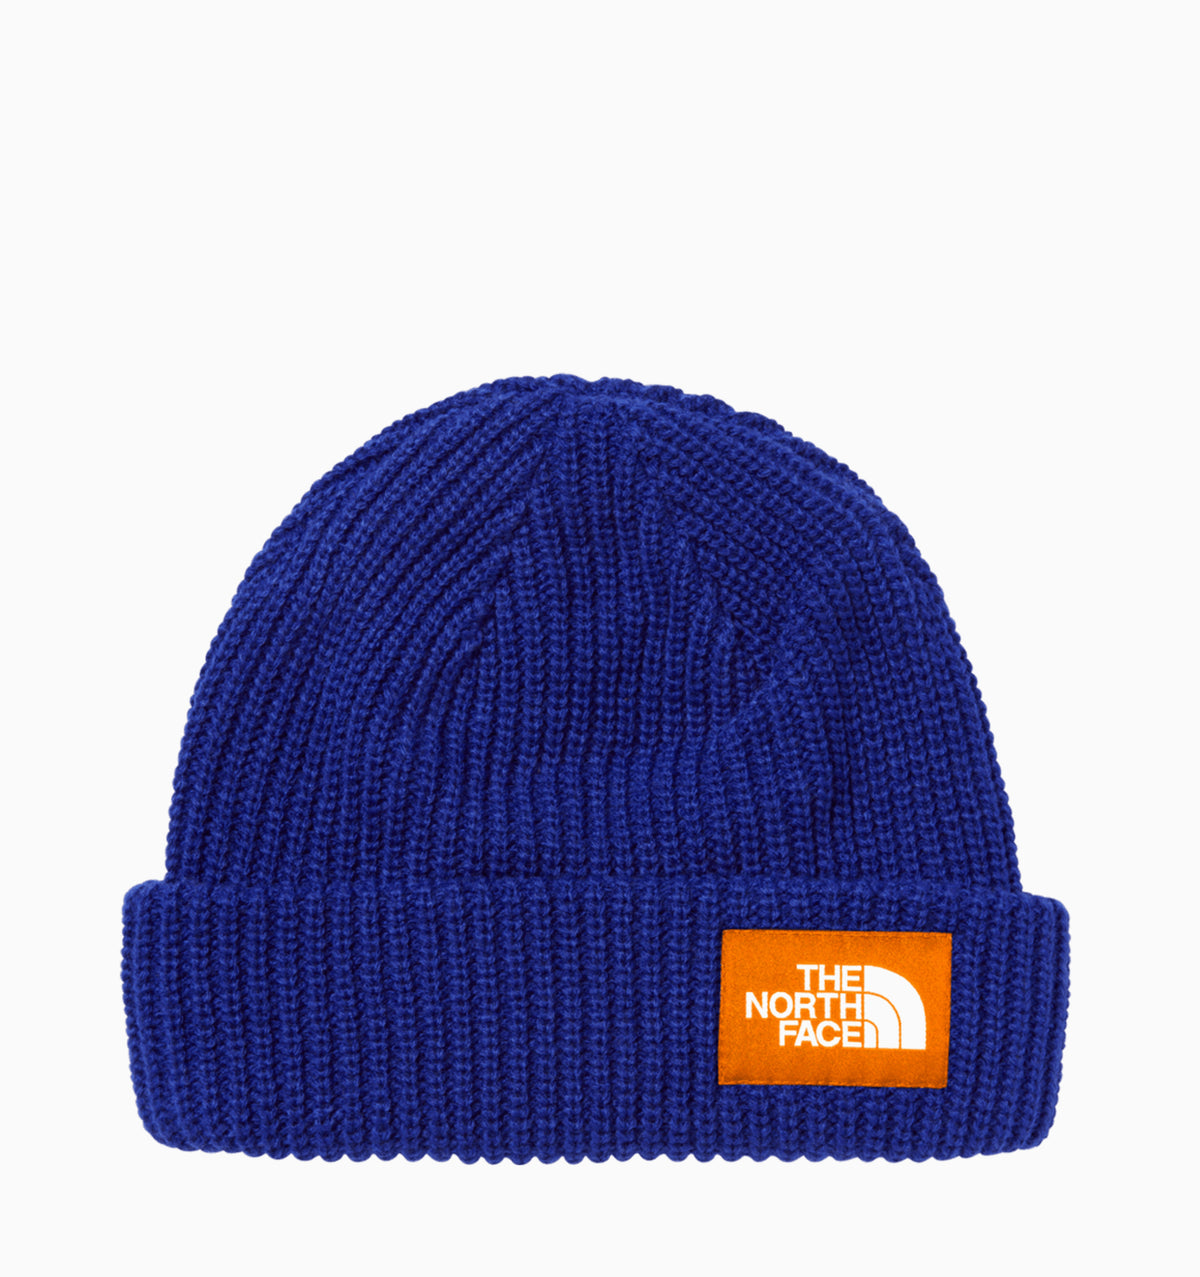 The North Face Salty Dog Beanie - Lapis Blue